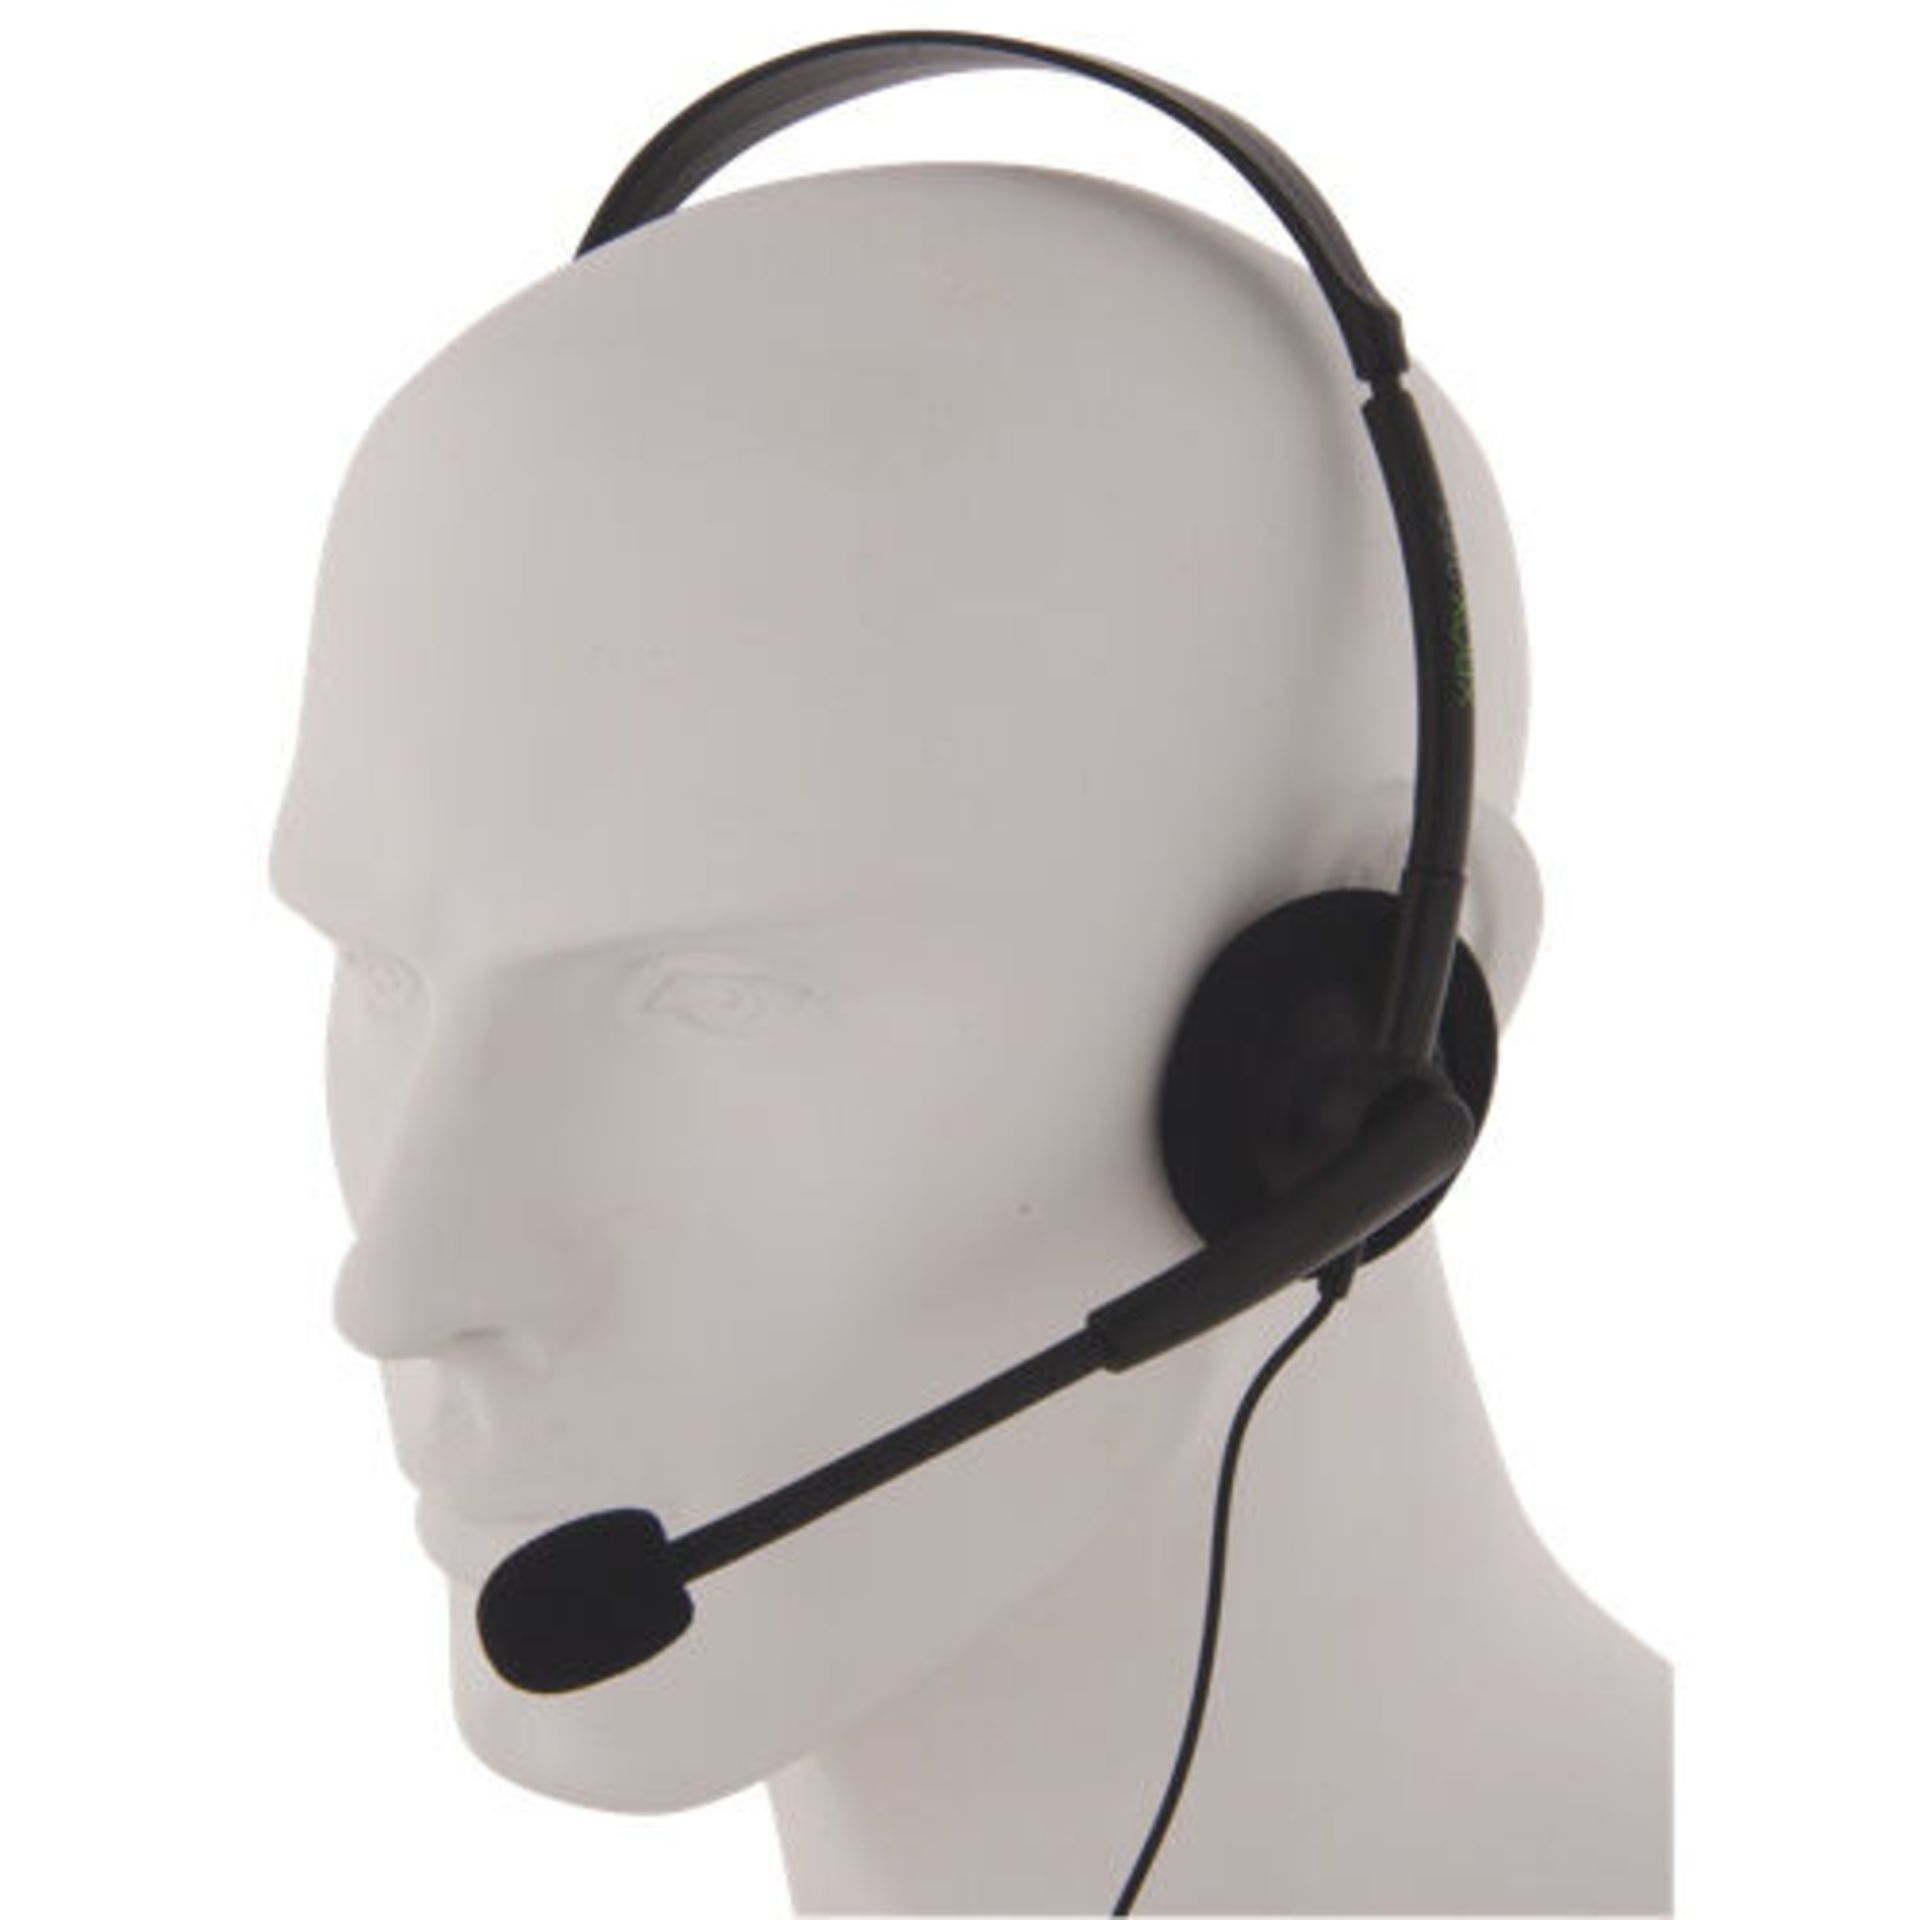 JOBLOT 100 X NEW OFFICIAL XBOX 360 LIVE ONLINE CHAT HEADSET WITH MIC GAMING HEADPHONES 2.5MM AUX - Image 3 of 6